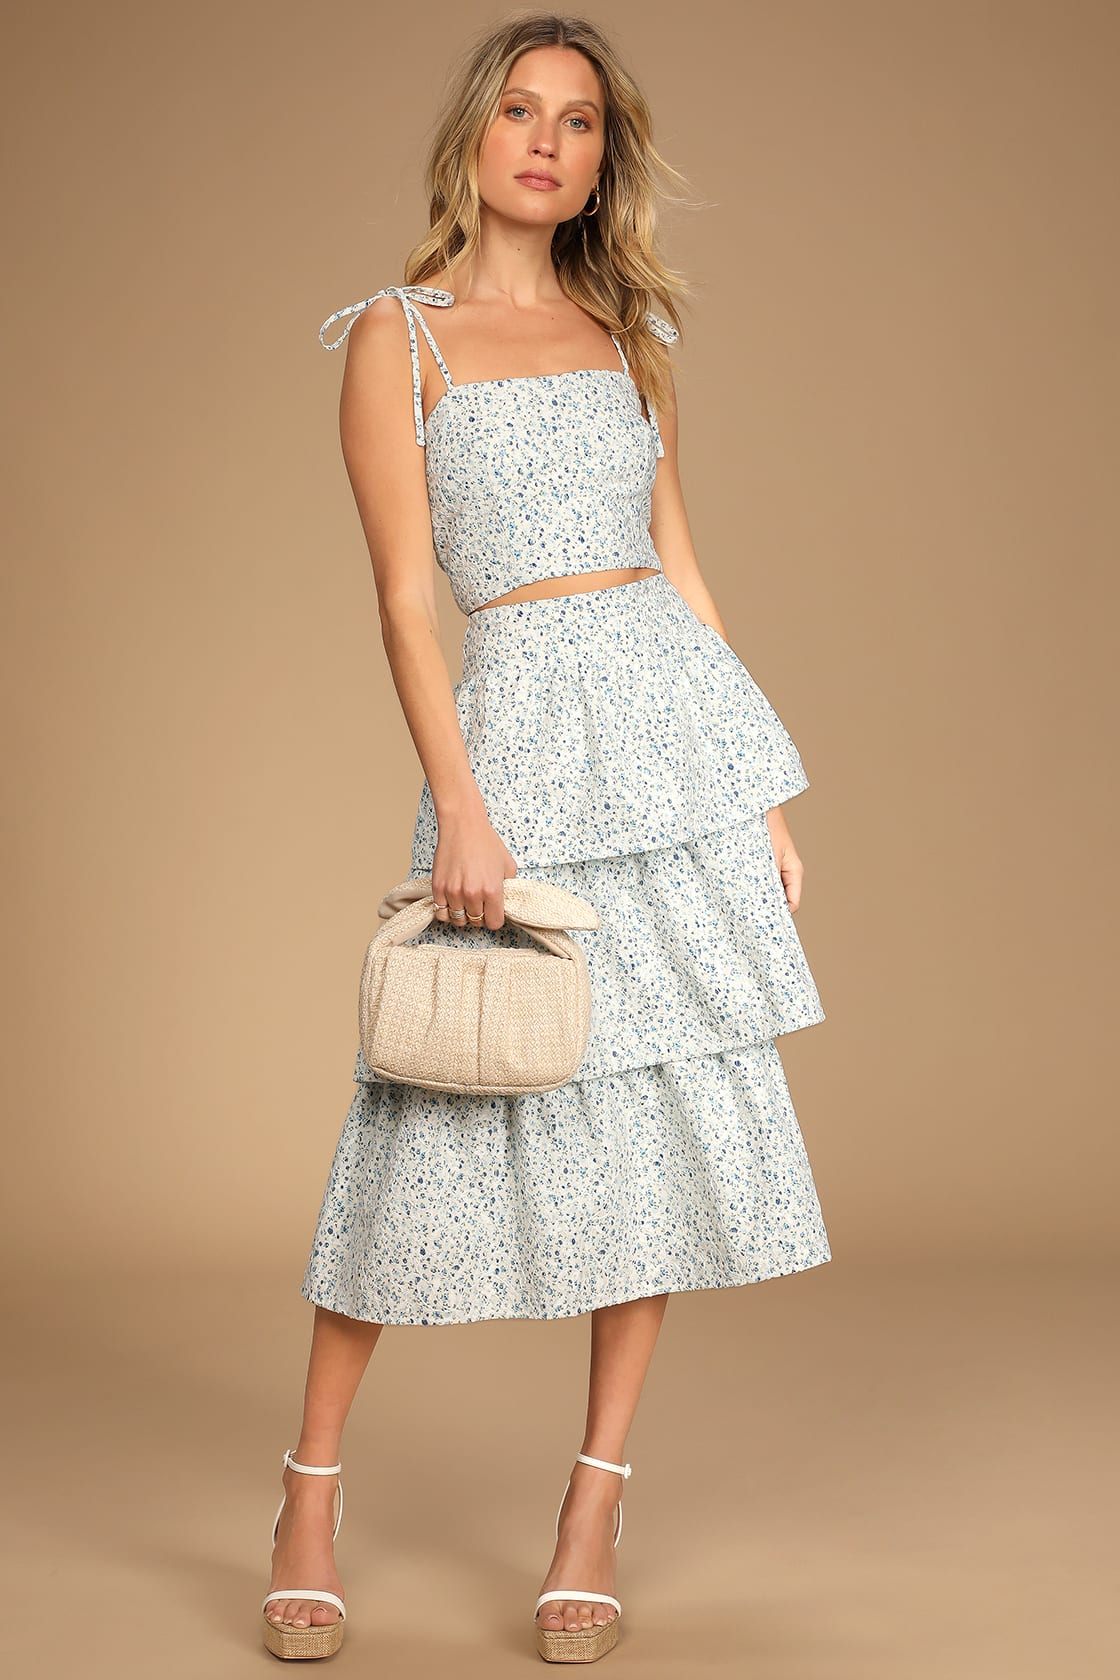 Top Tier Babe Blue Floral Embroidered Sleeveless Midi Dress